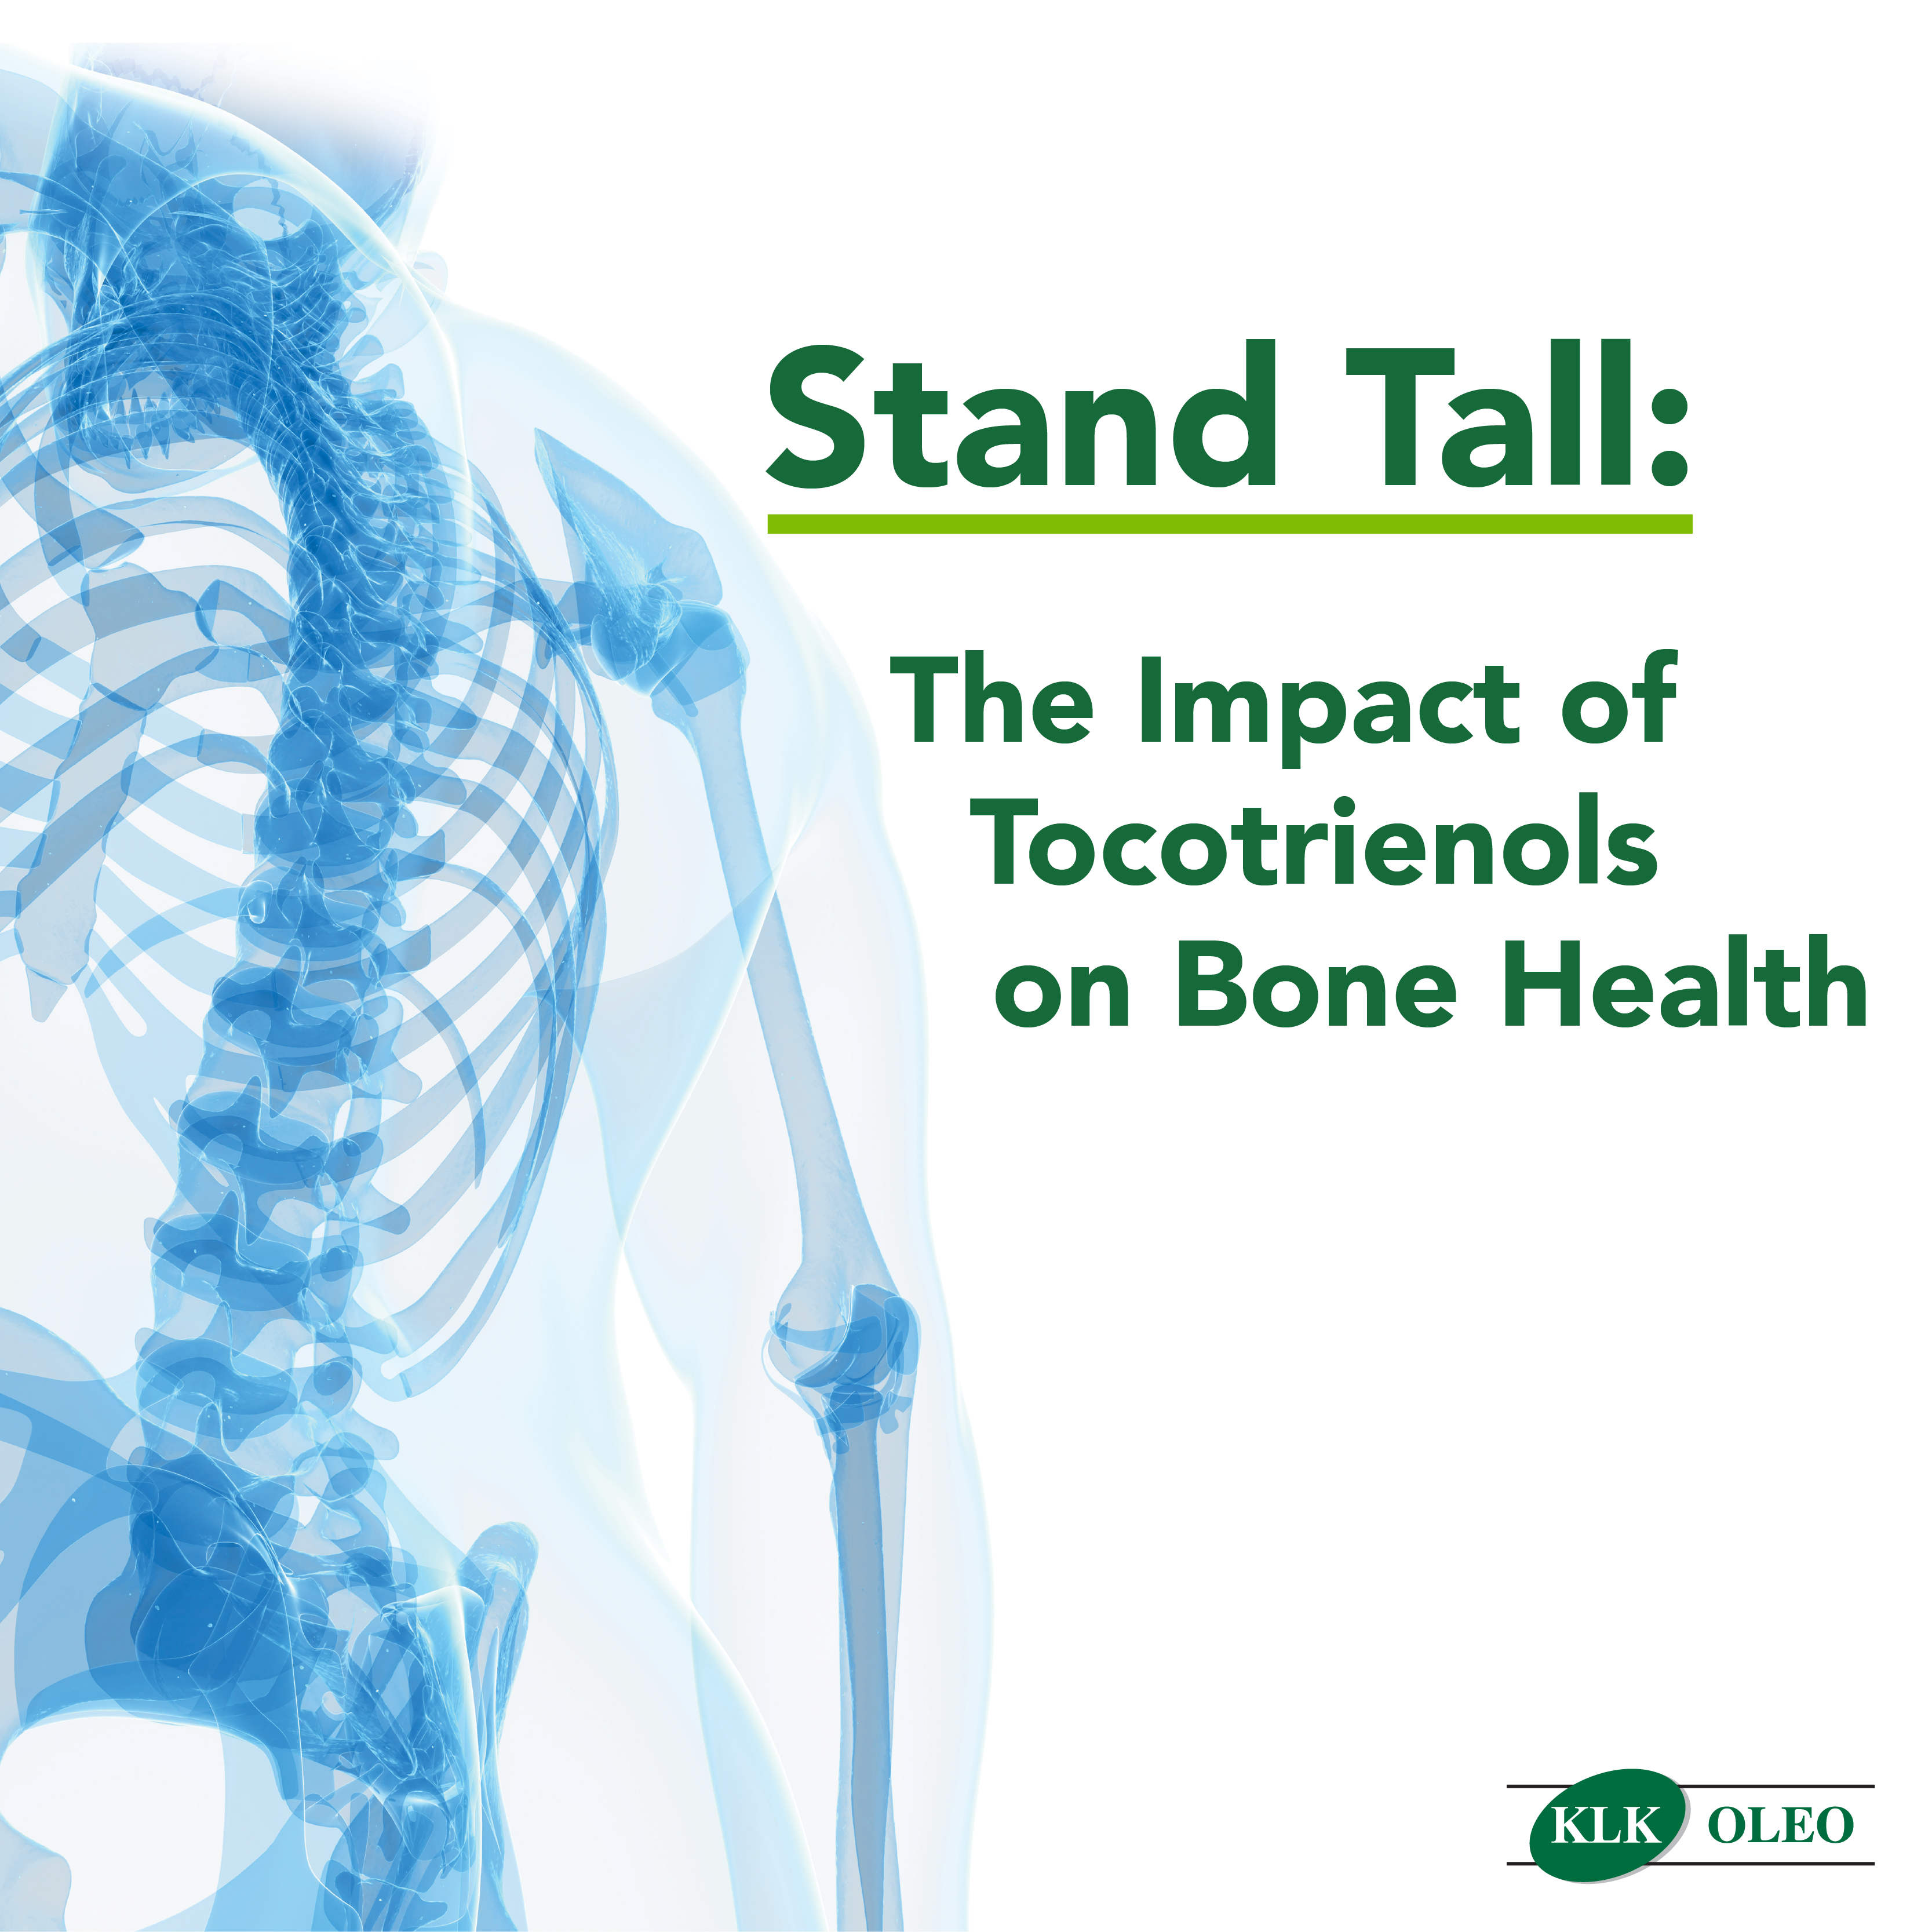 Stand Tall: The Impact of Tocotrienols on Bone Health